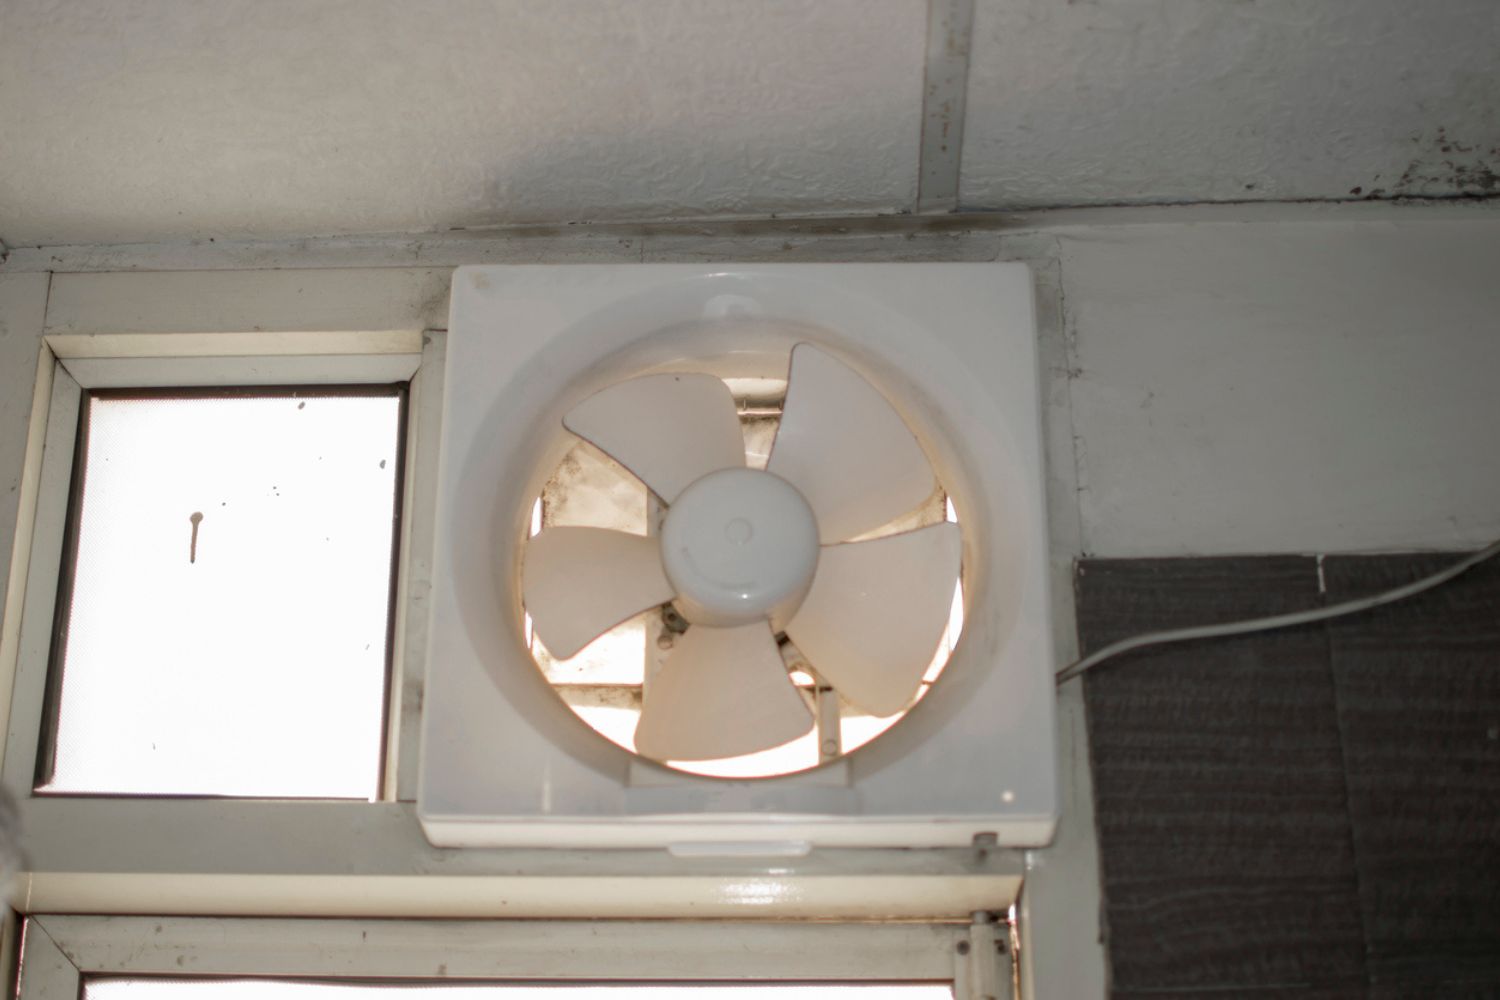 How Much Does a Whole-House Fan Cost?